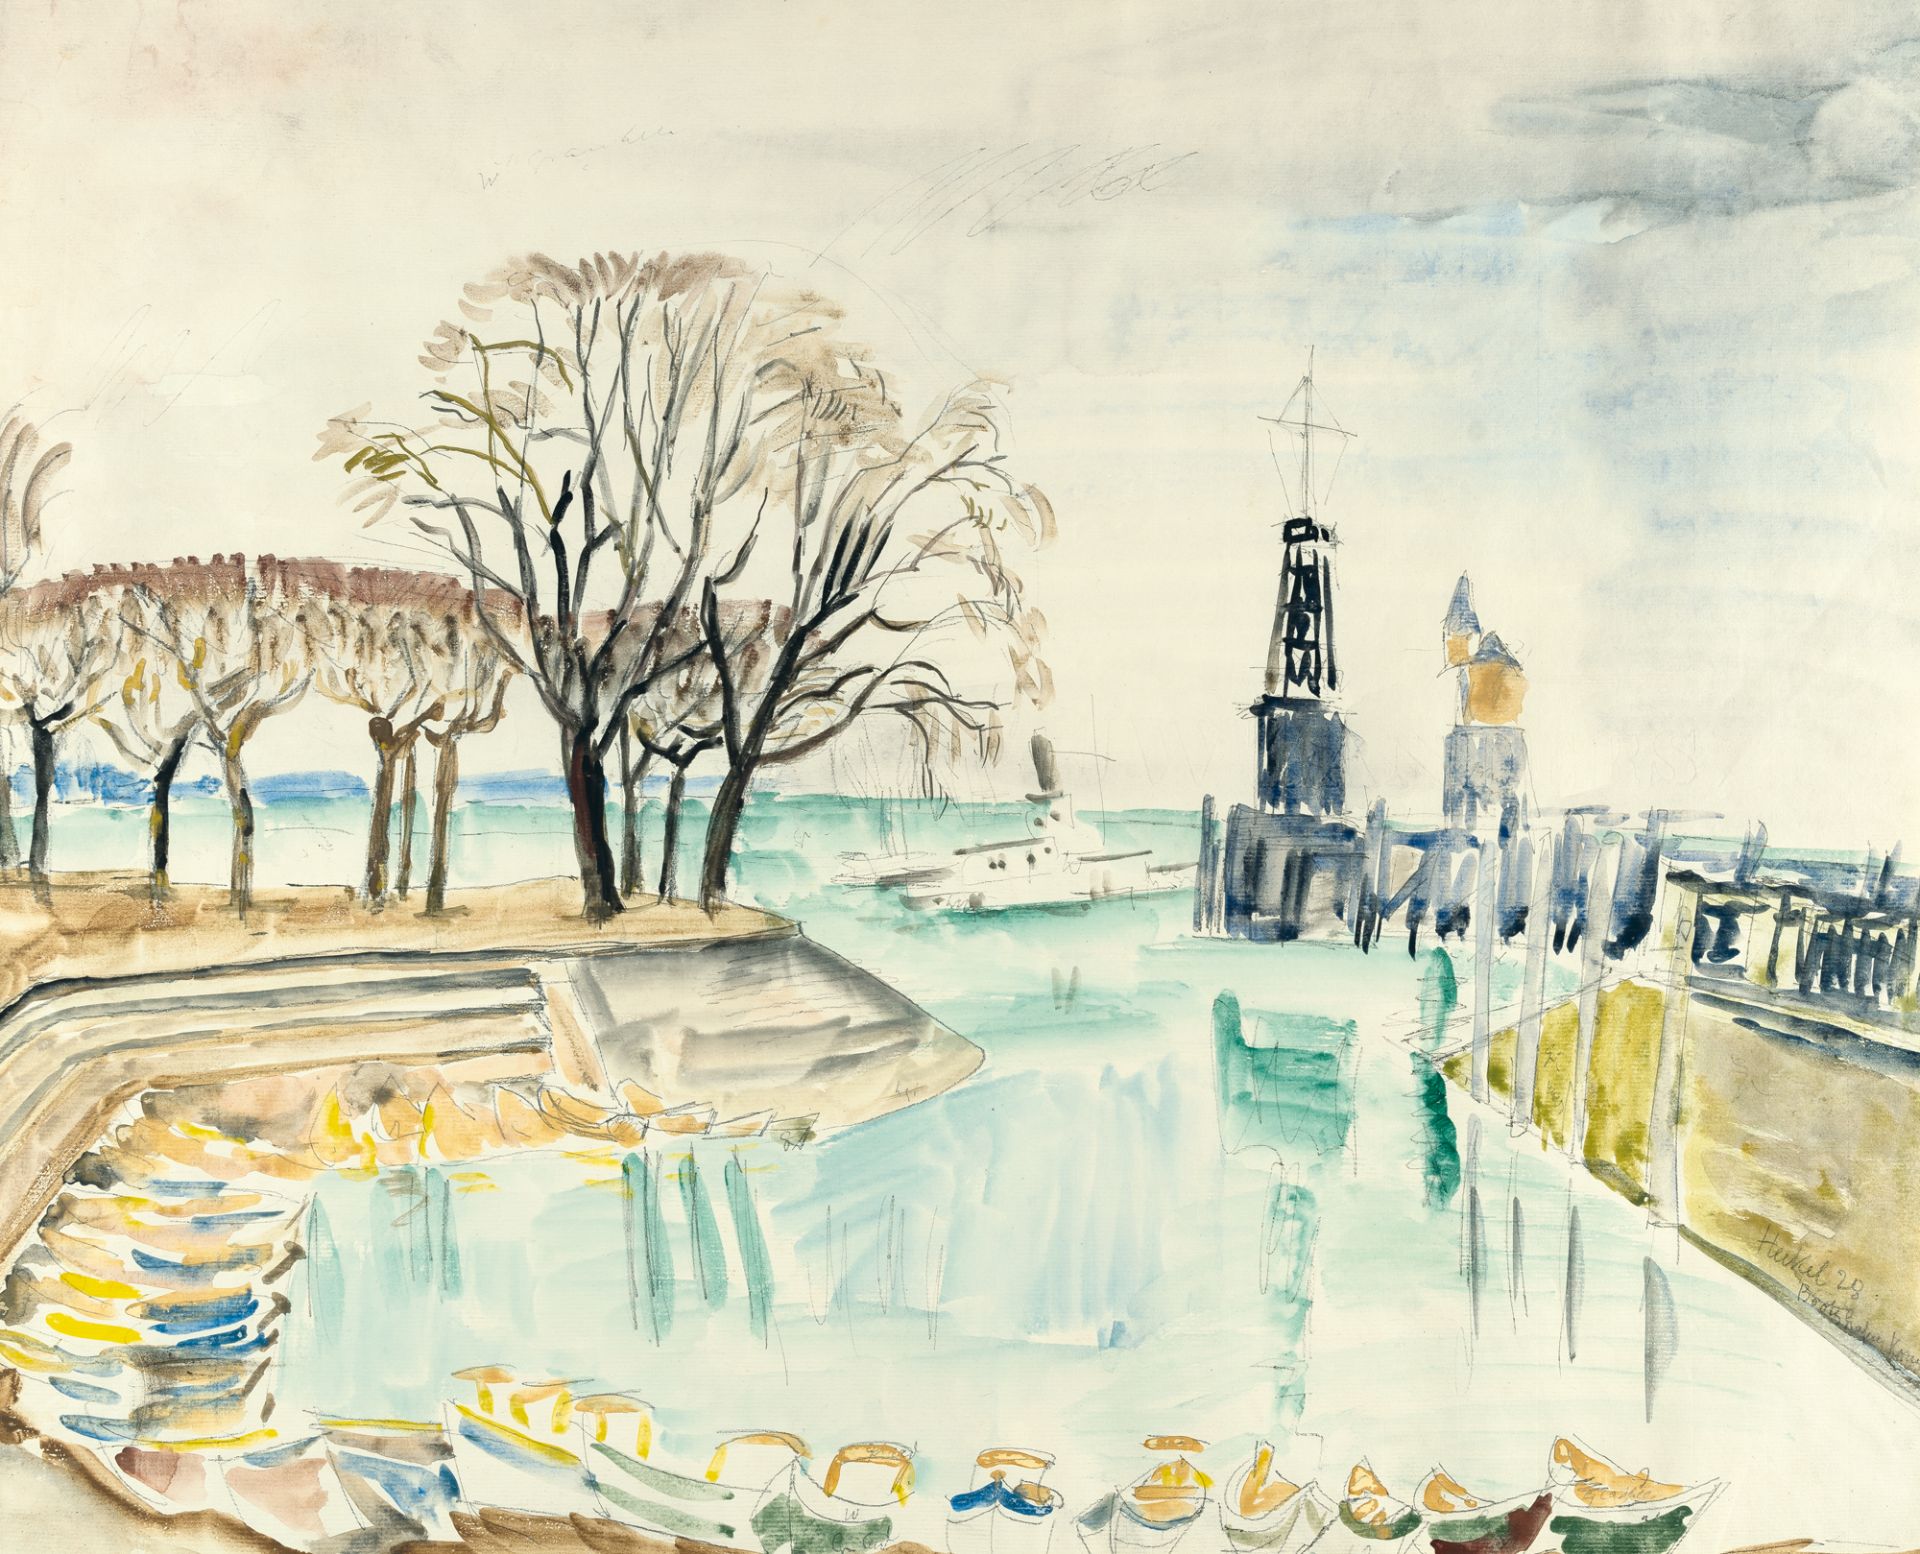 Erich Heckel, „Bootshafen Konstanz“ (Boat harbour at Constance).Watercolour, gouache and pencil on